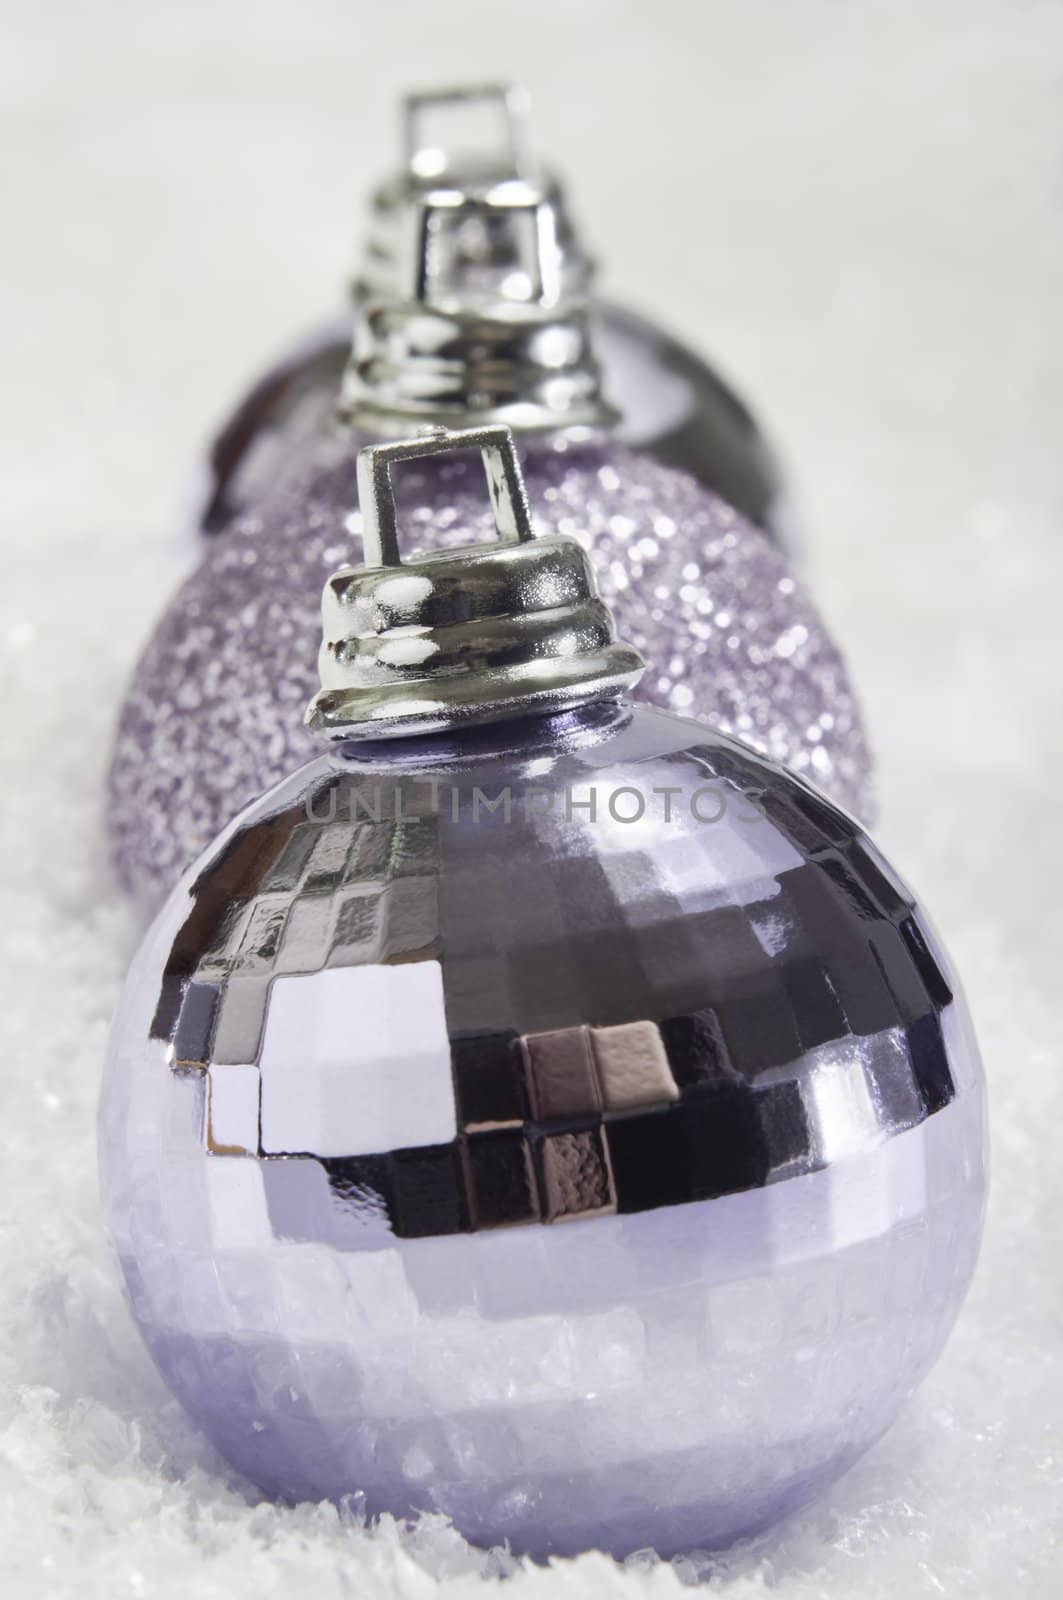 Close up (macro).  A row of three mauve Christmas baubles with shiny and sparkling textures, resting on a fake snow surface.  